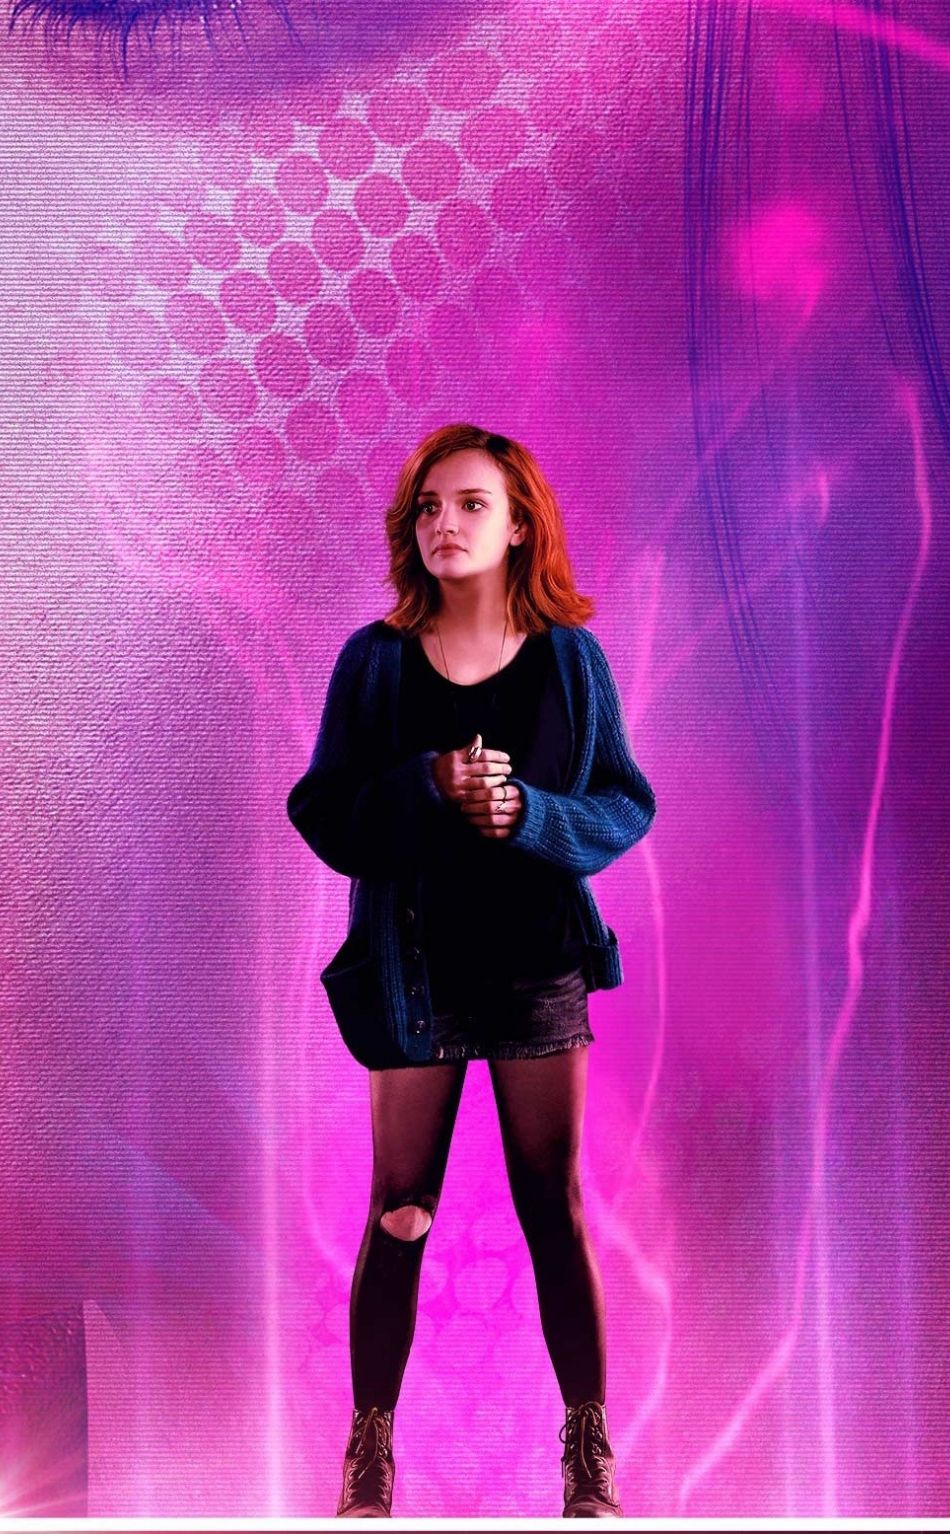 Download 950x1534 wallpaper olivia cooke, ready player one, movie, promotion, iphone, 950x1534 HD image, background, 3151